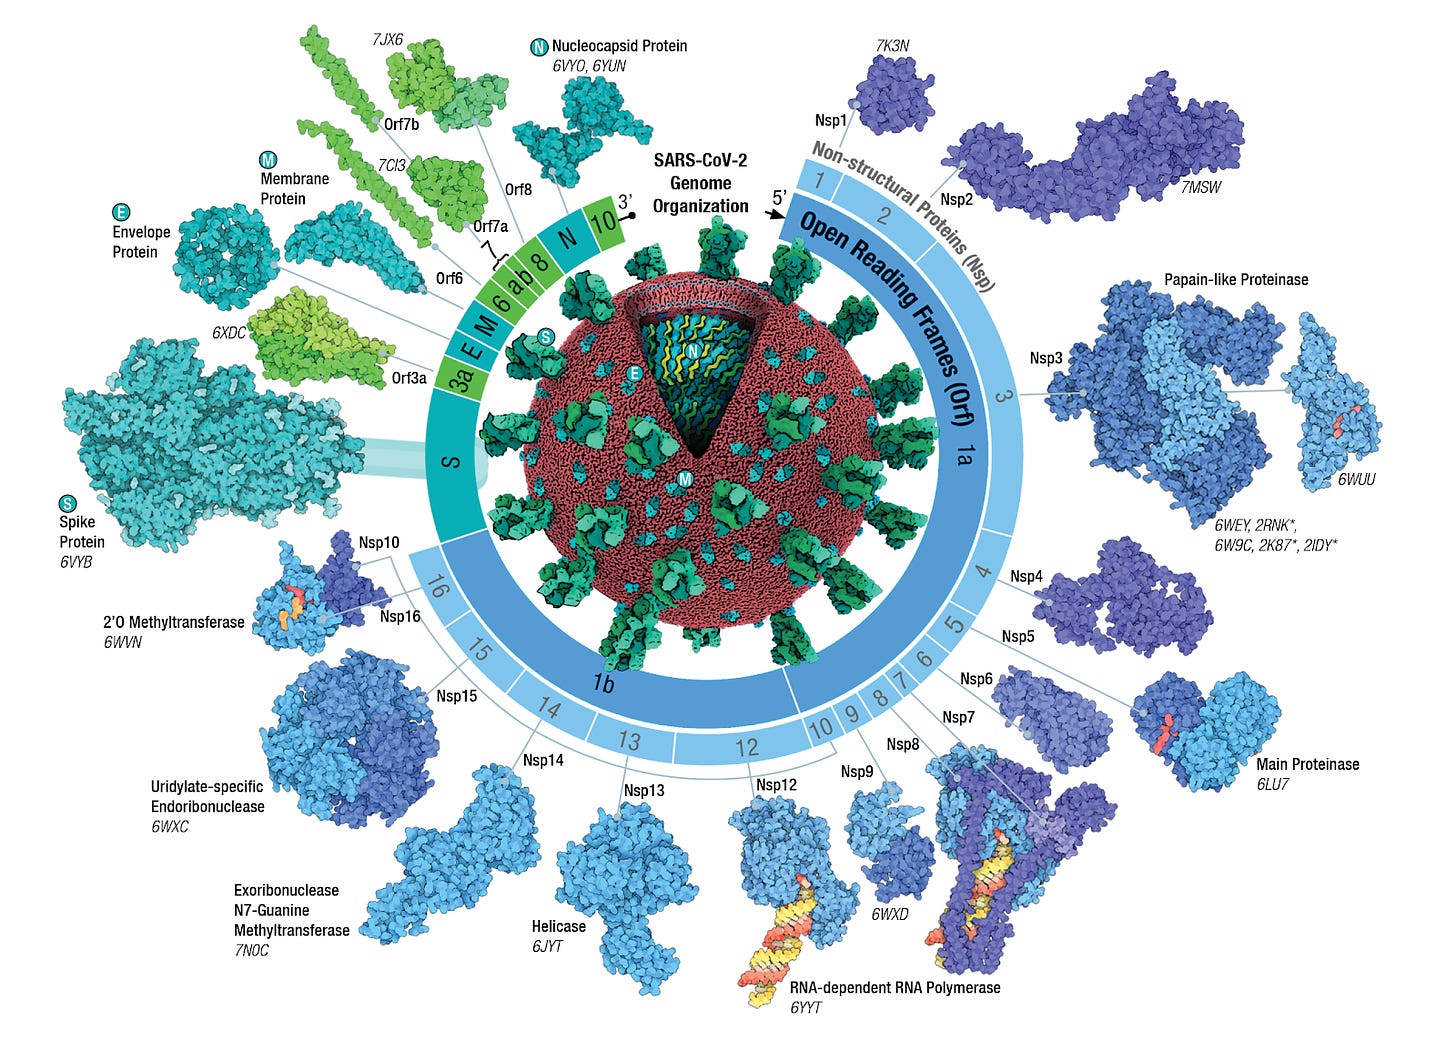 SARS-CoV-2 Genome and Proteins central illustration featured in the flyer